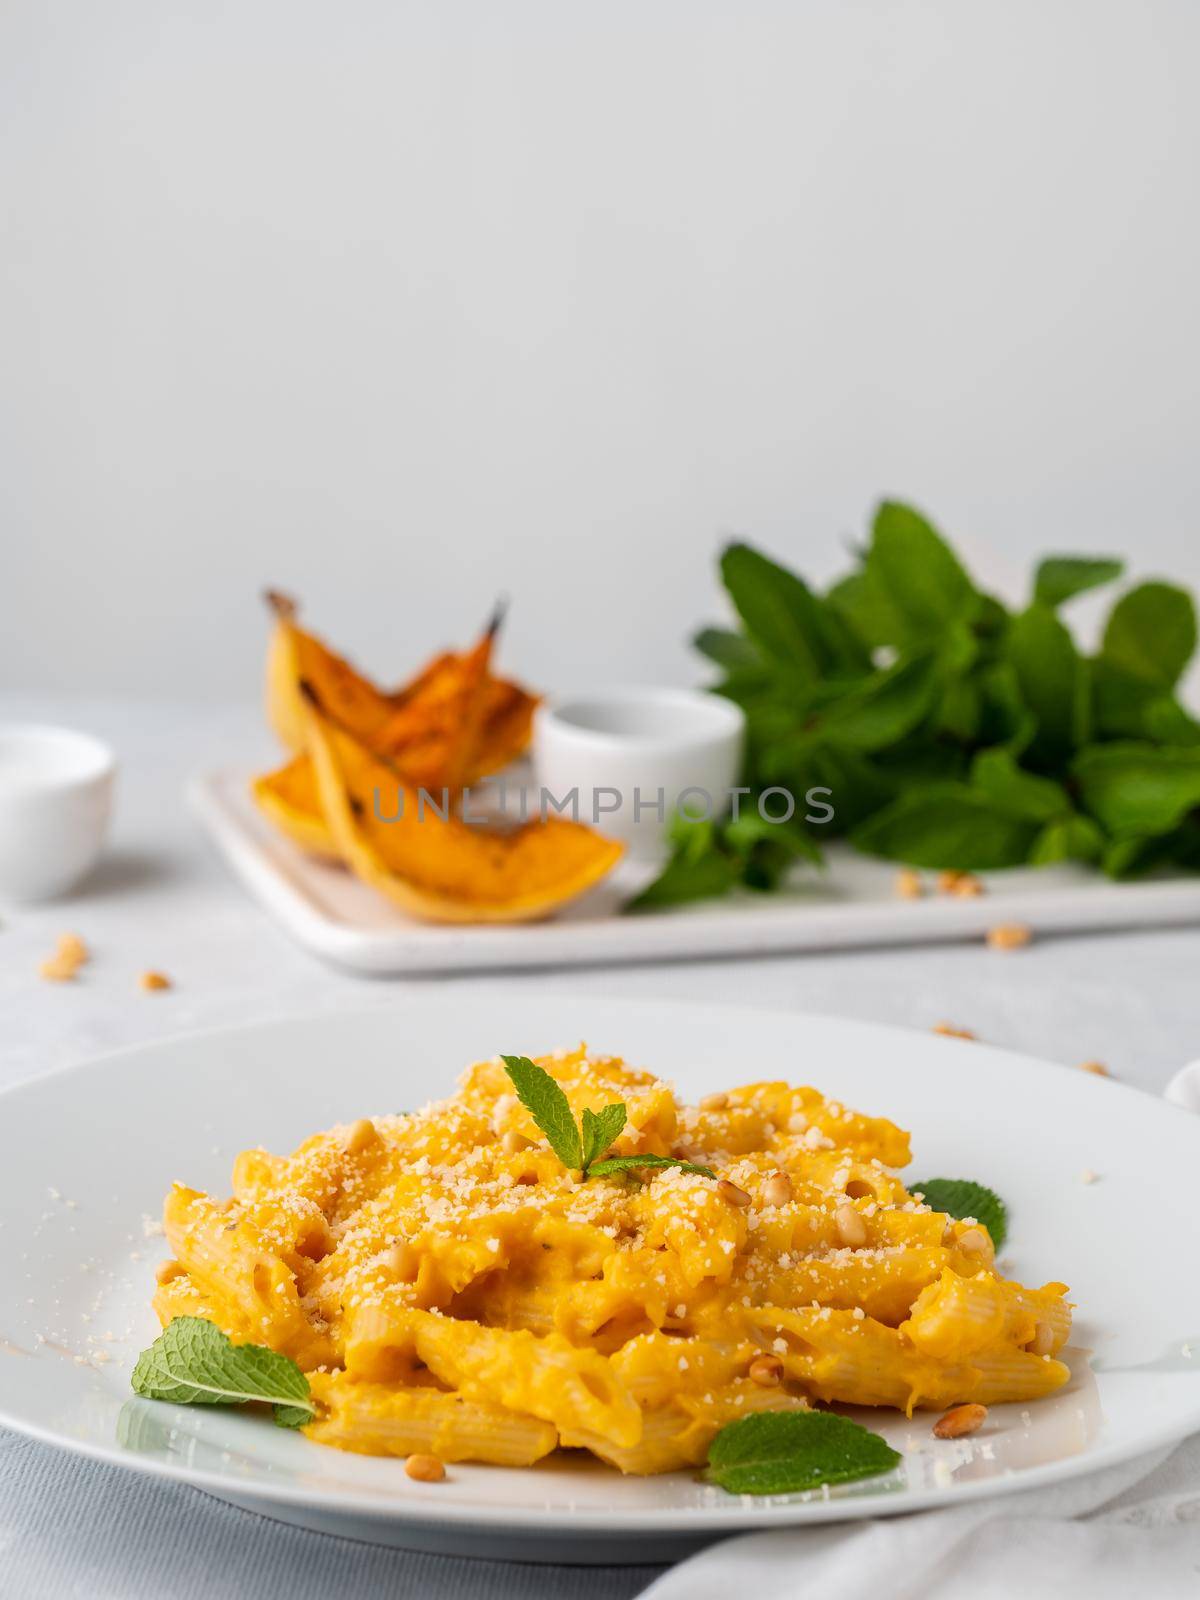 Pumpkin pasta penne with thick creamy sauce of baked squash and parmesan, side view, vertical